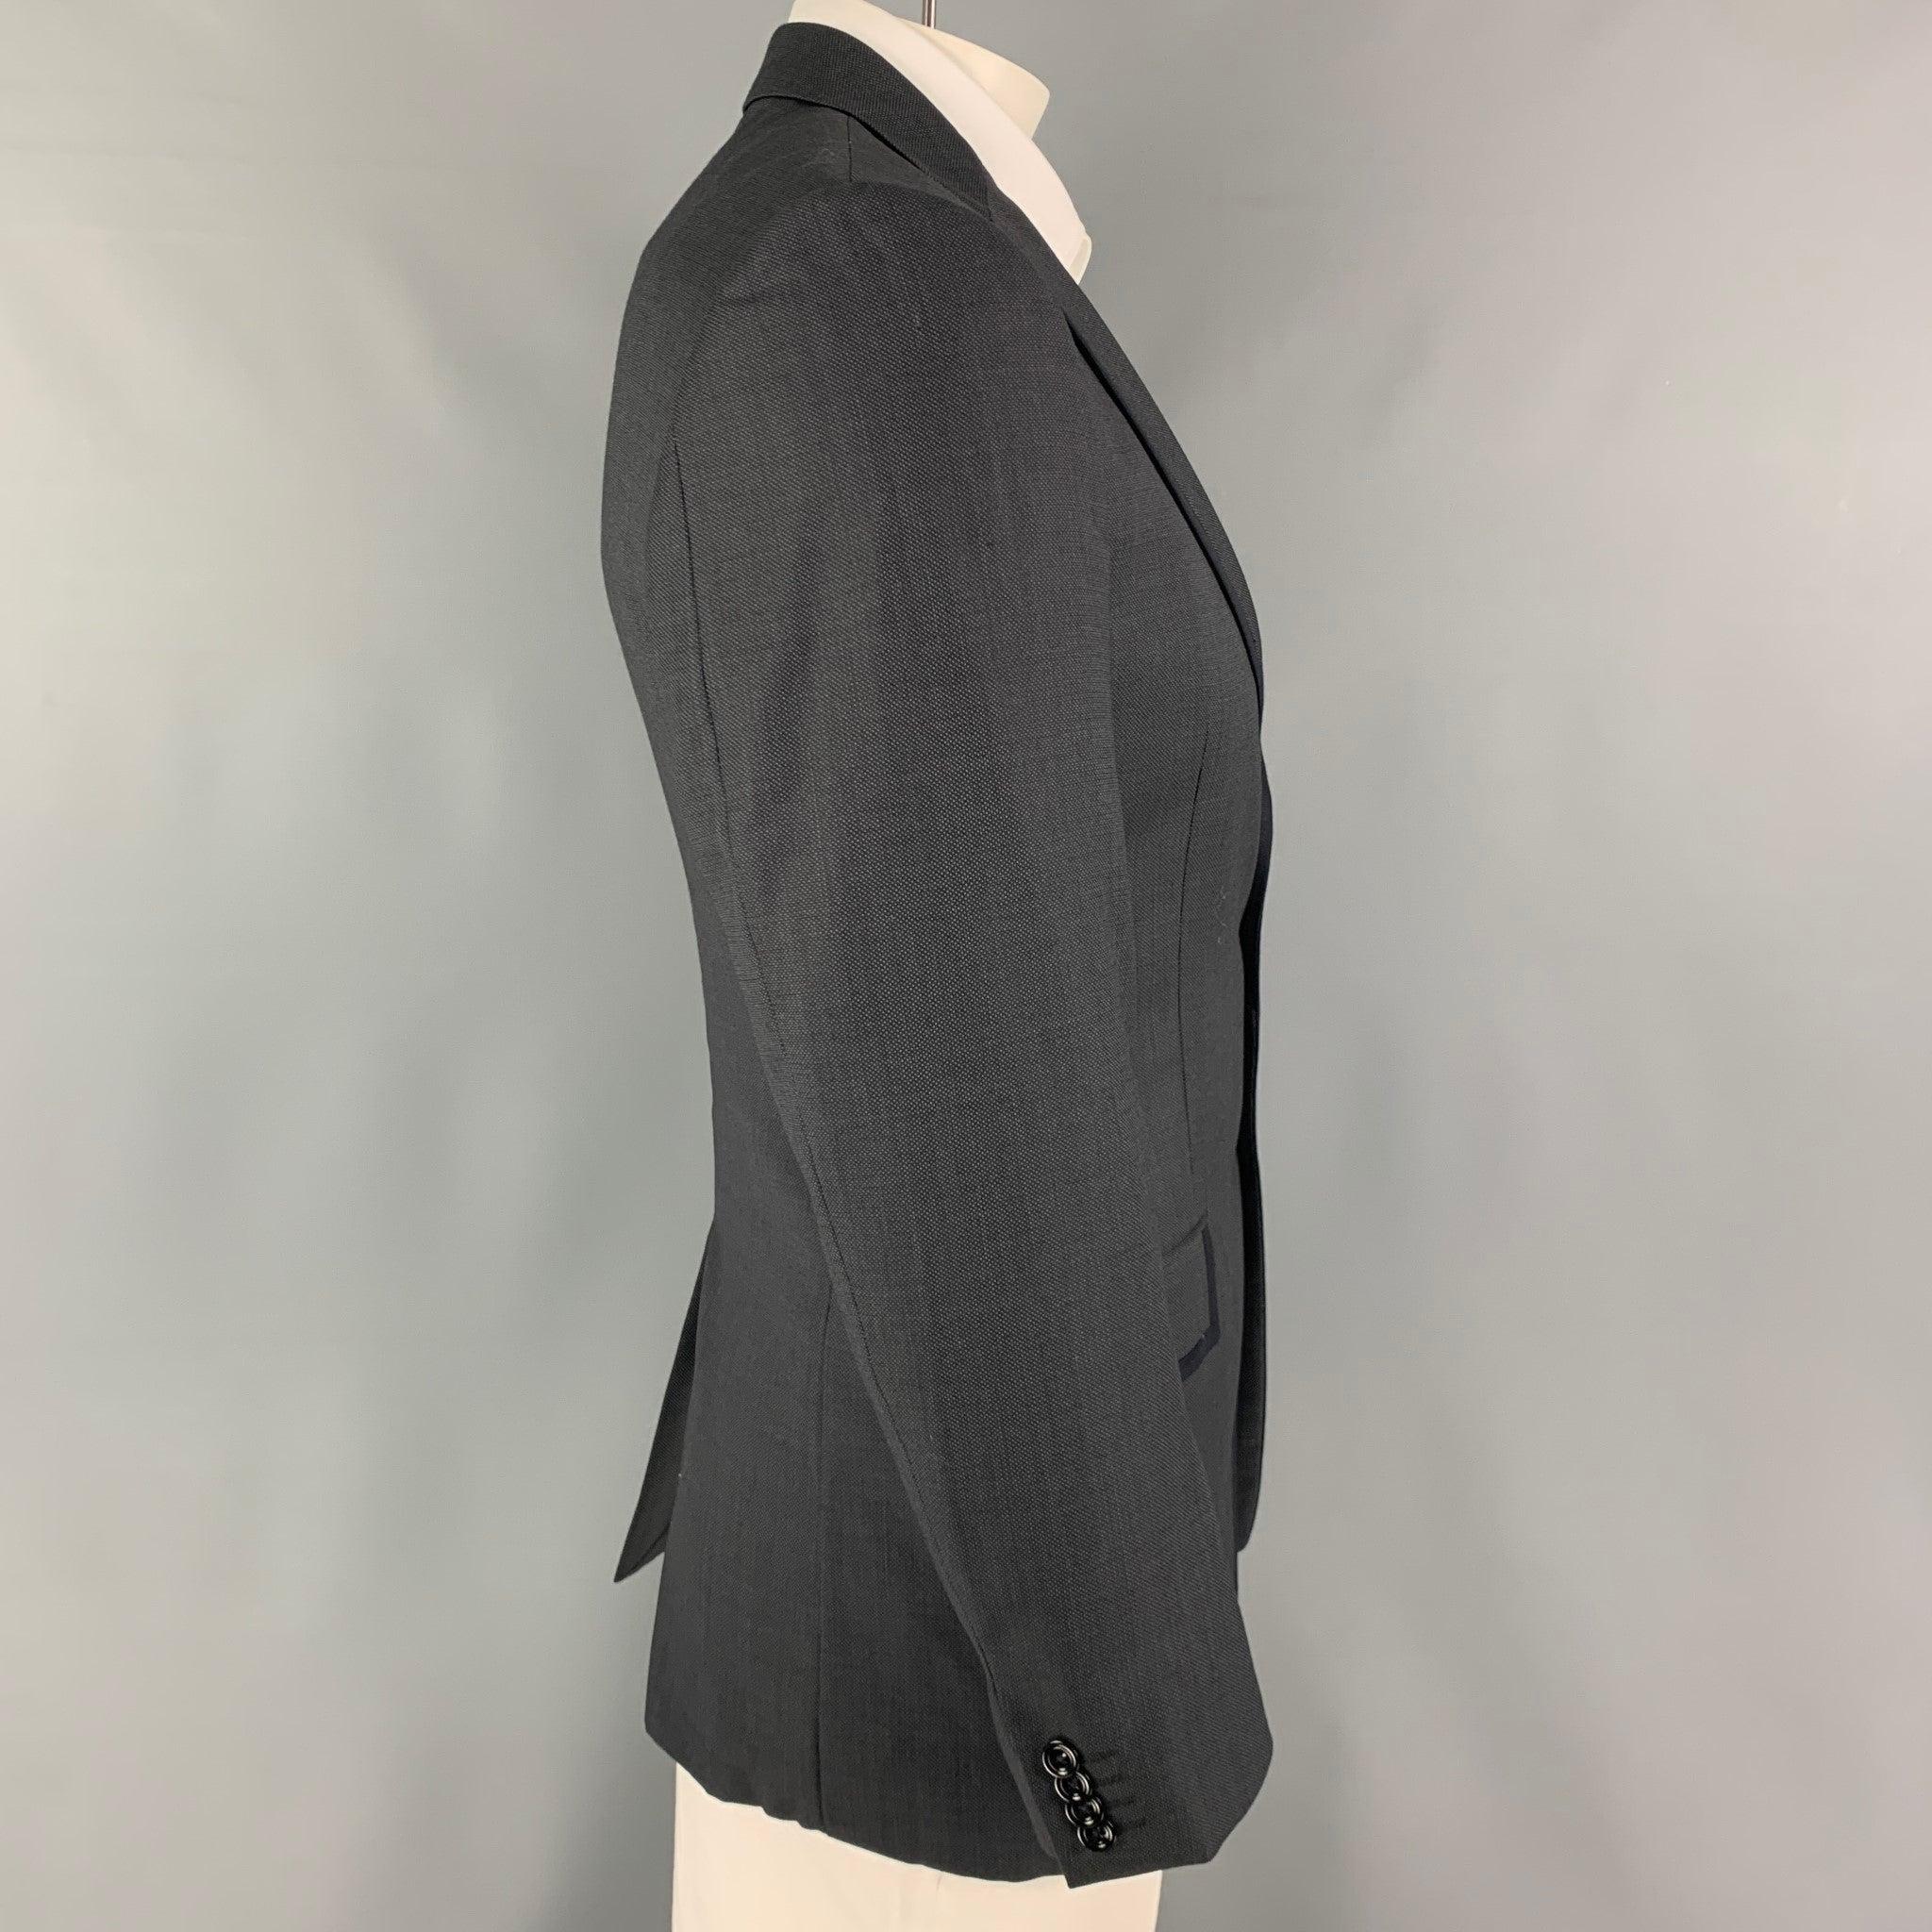 VERSACE COLLECTION sport coat comes in a charcoal & black woven wool with a full liner featuring a notch lapel, flap pockets, single back vent, and a double button closure.
Excellent
Pre-Owned Condition. 

Marked:   50 

Measurements: 
 
Shoulder: